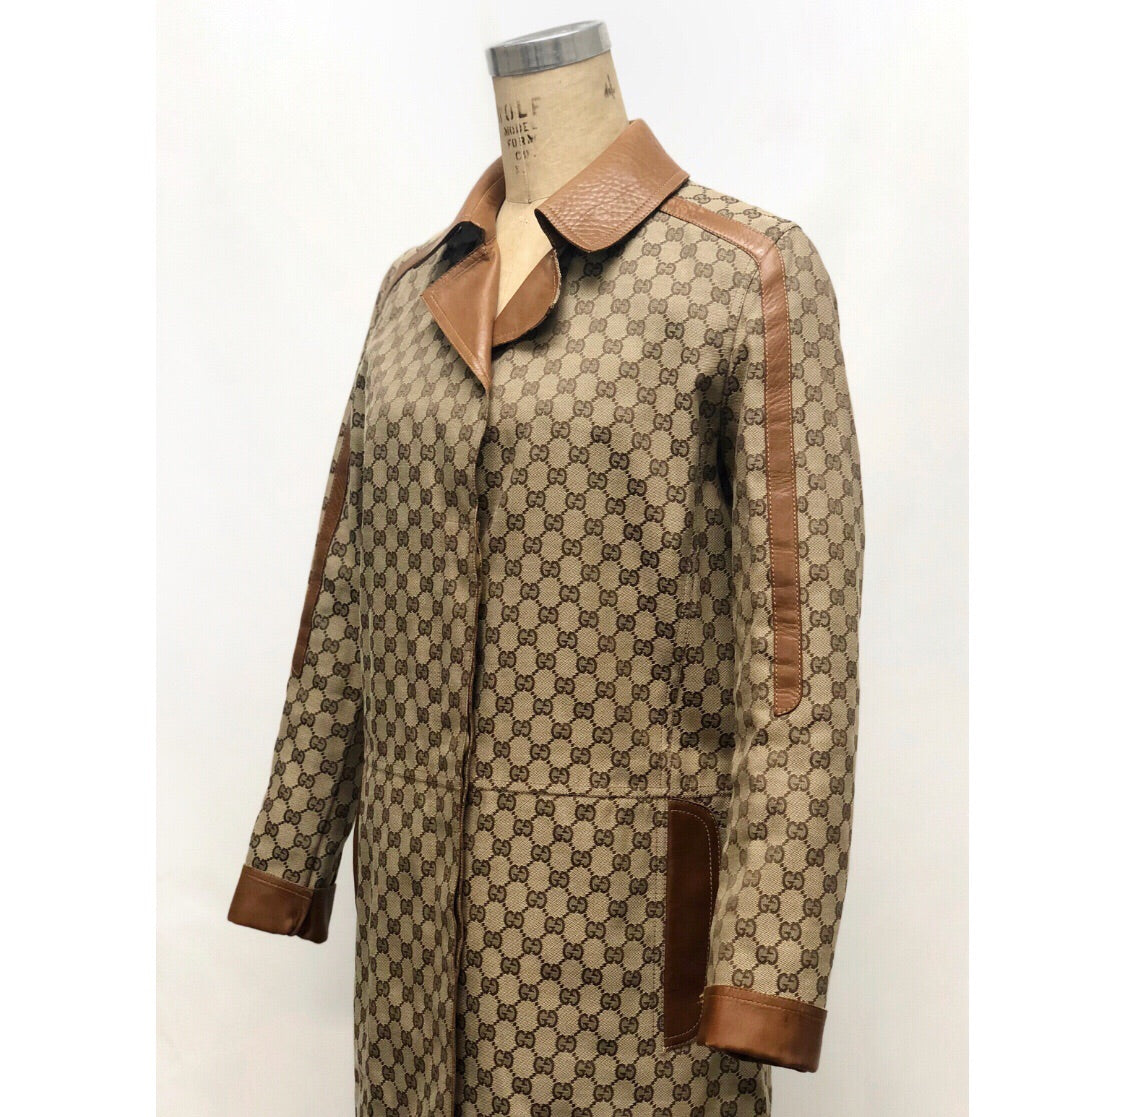 Gucci Vintage Monogram and Leather Coat